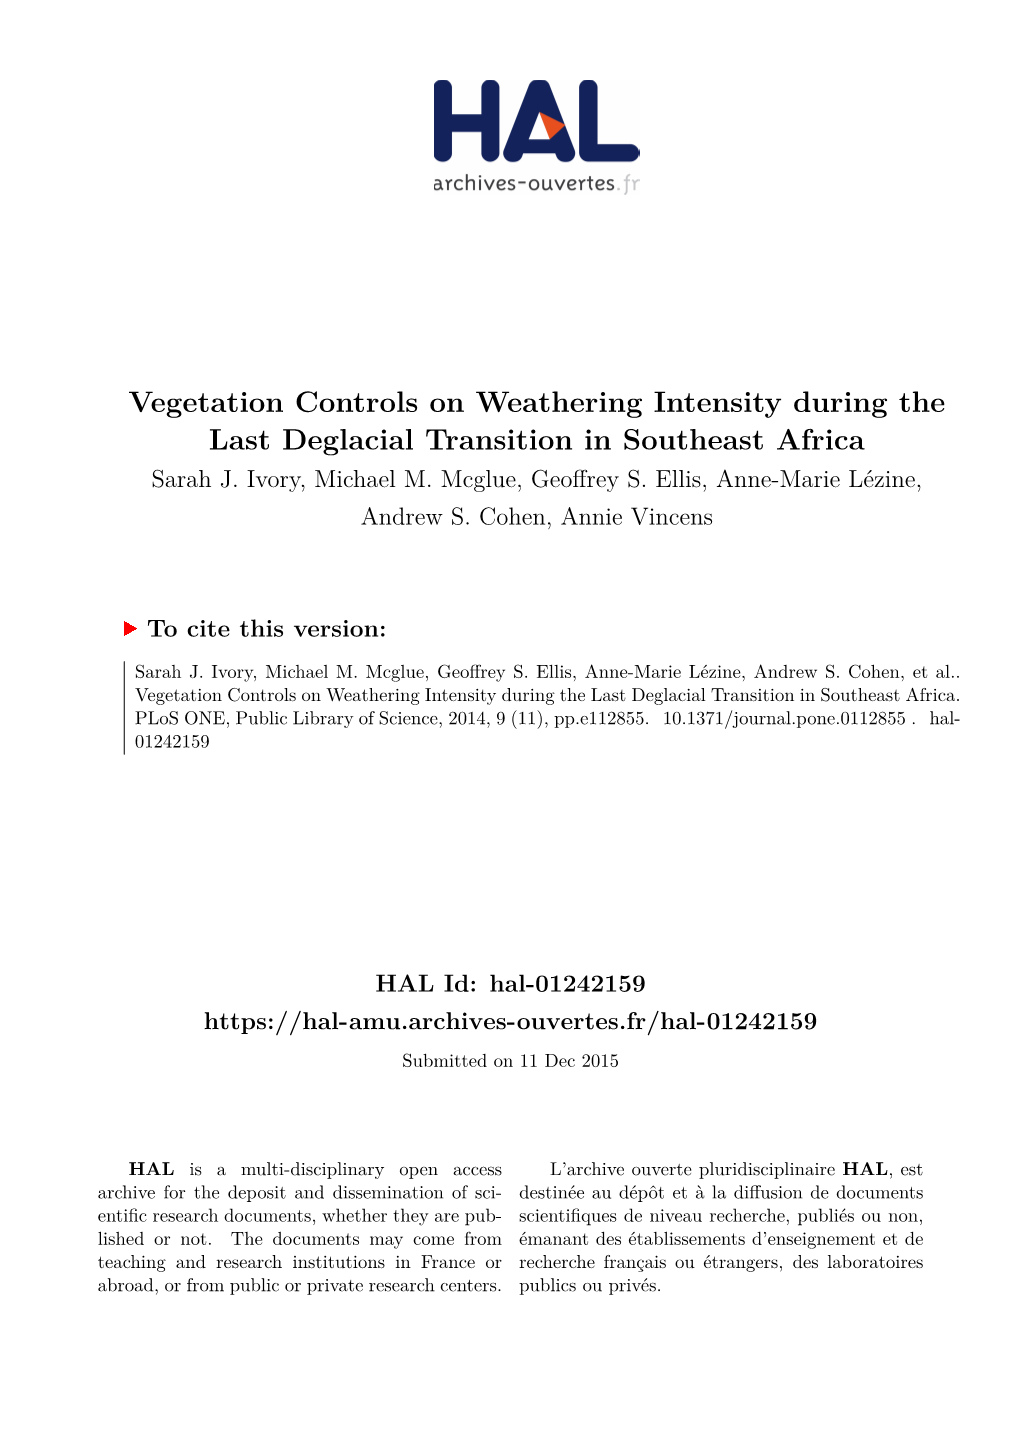 Vegetation Controls on Weathering Intensity During the Last Deglacial Transition in Southeast Africa Sarah J